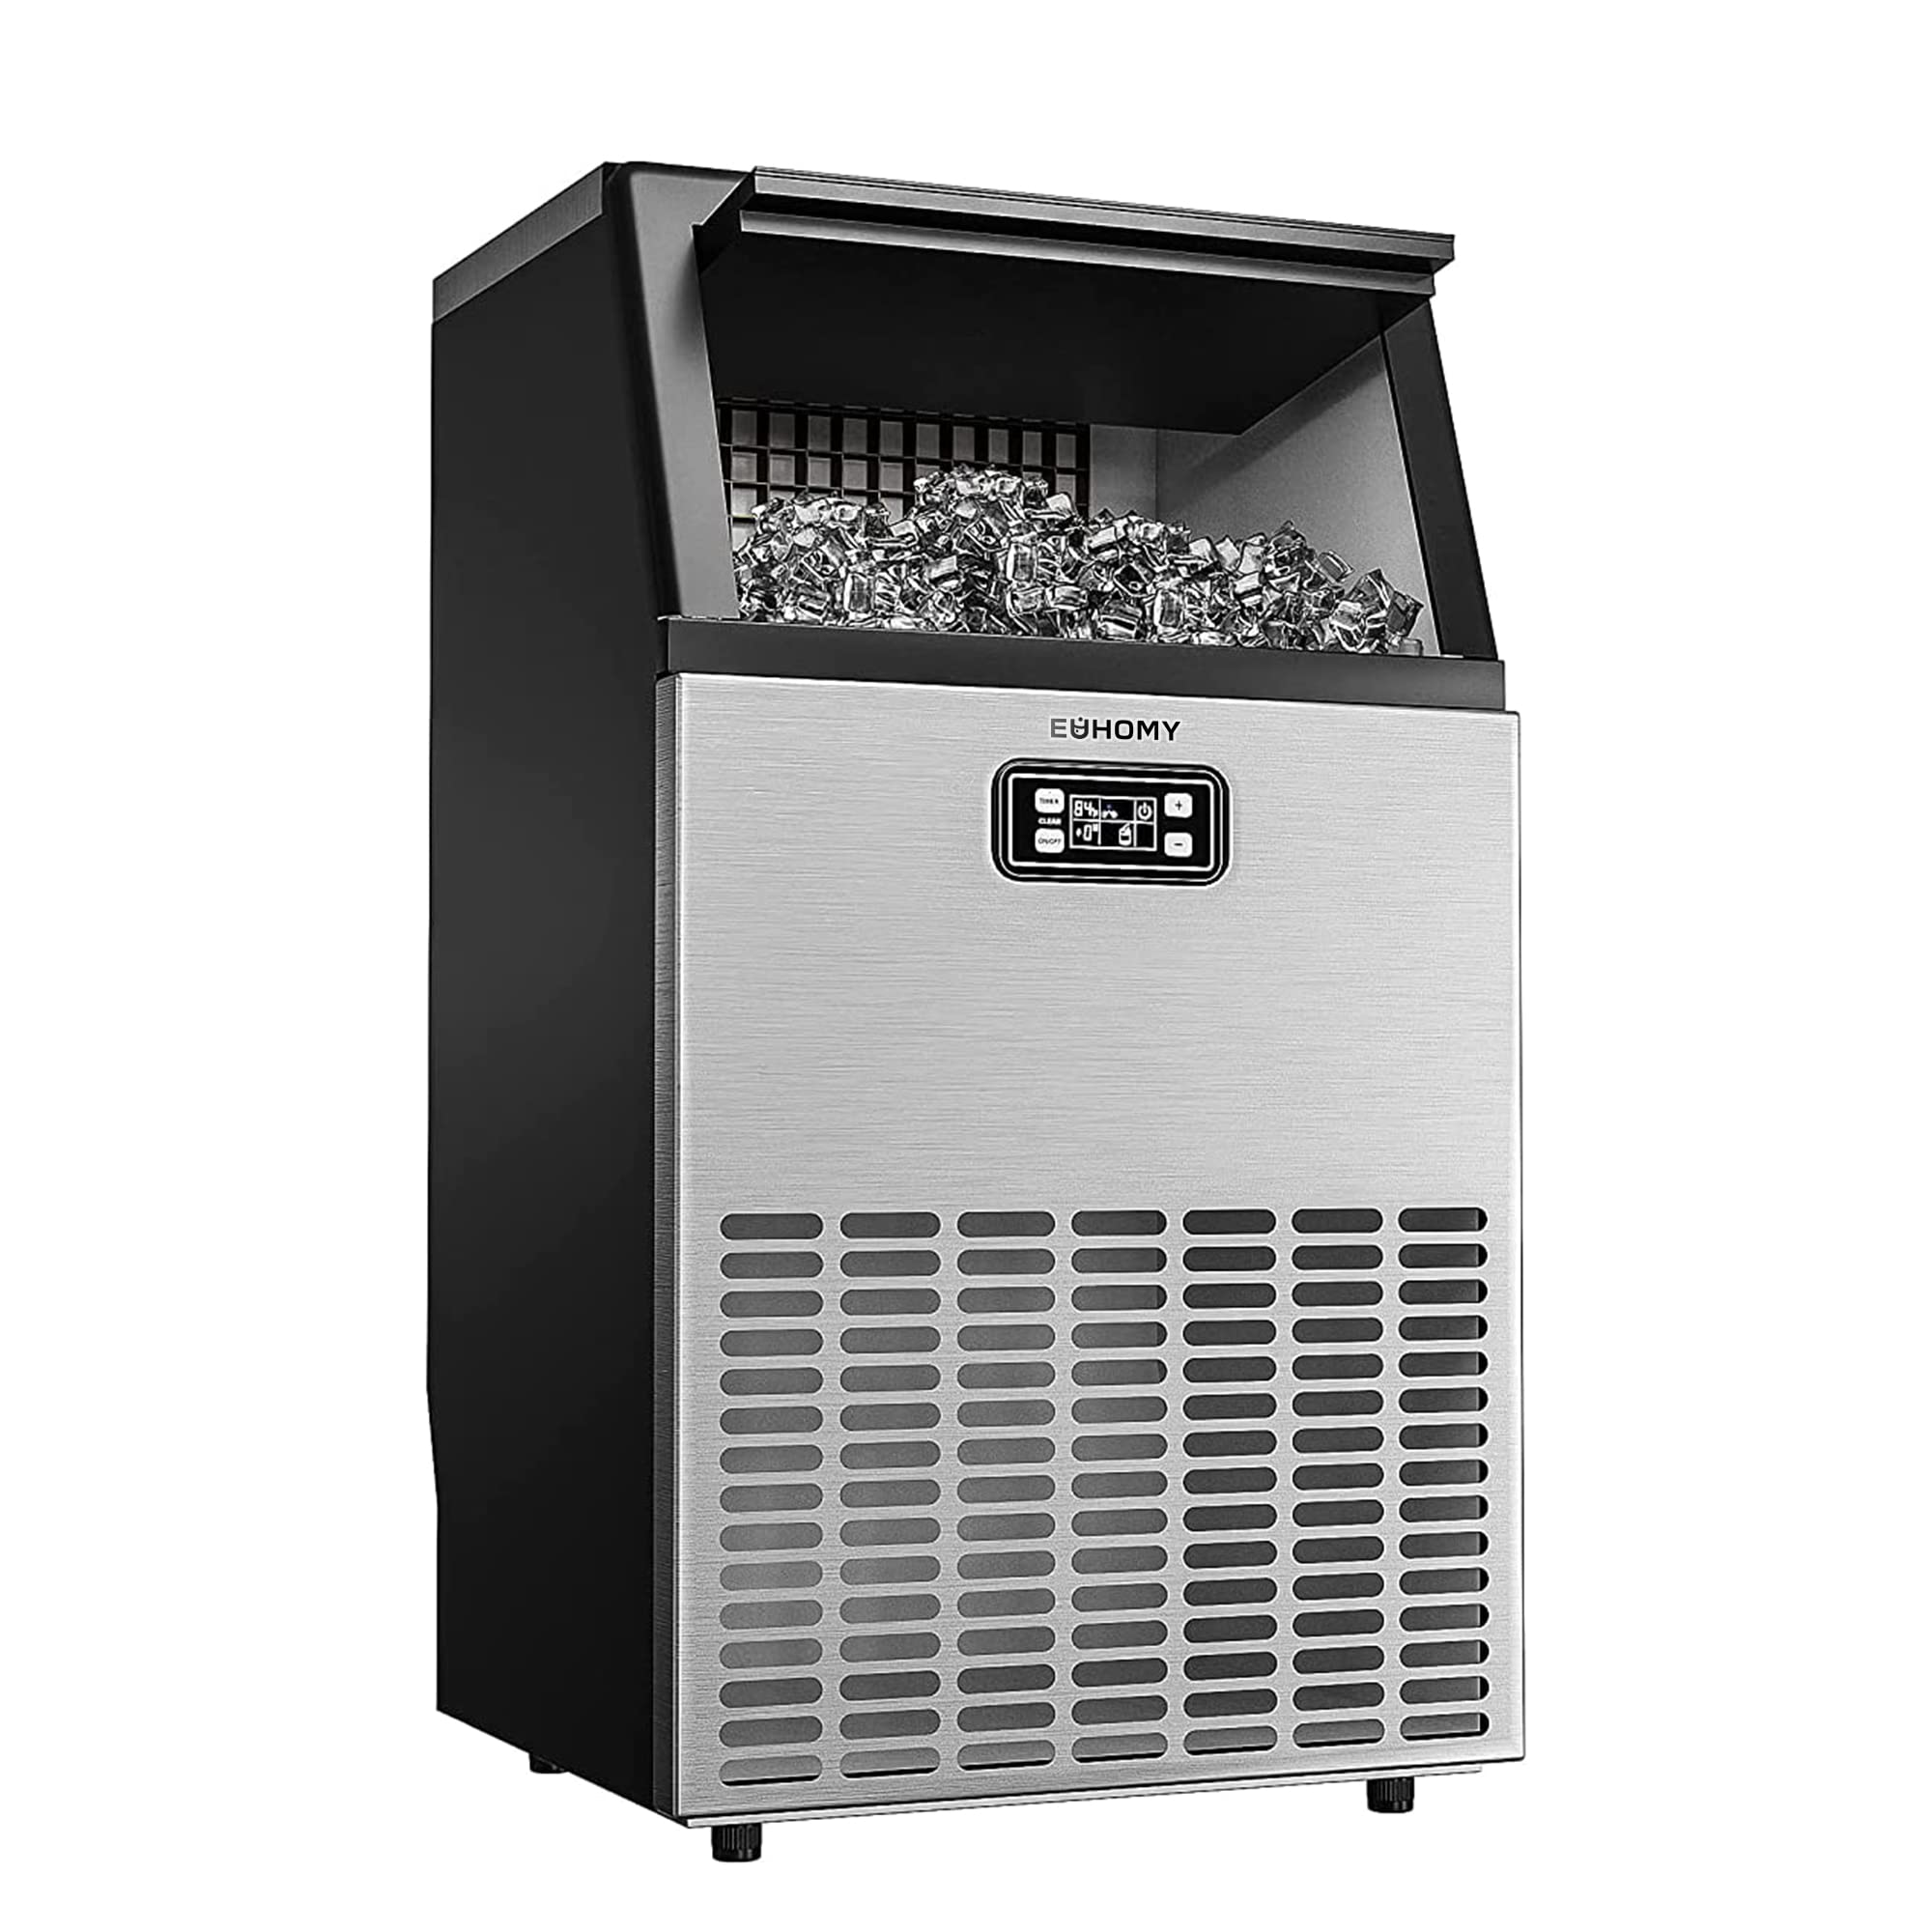 EUHOMY Commercial Ice Maker Machine